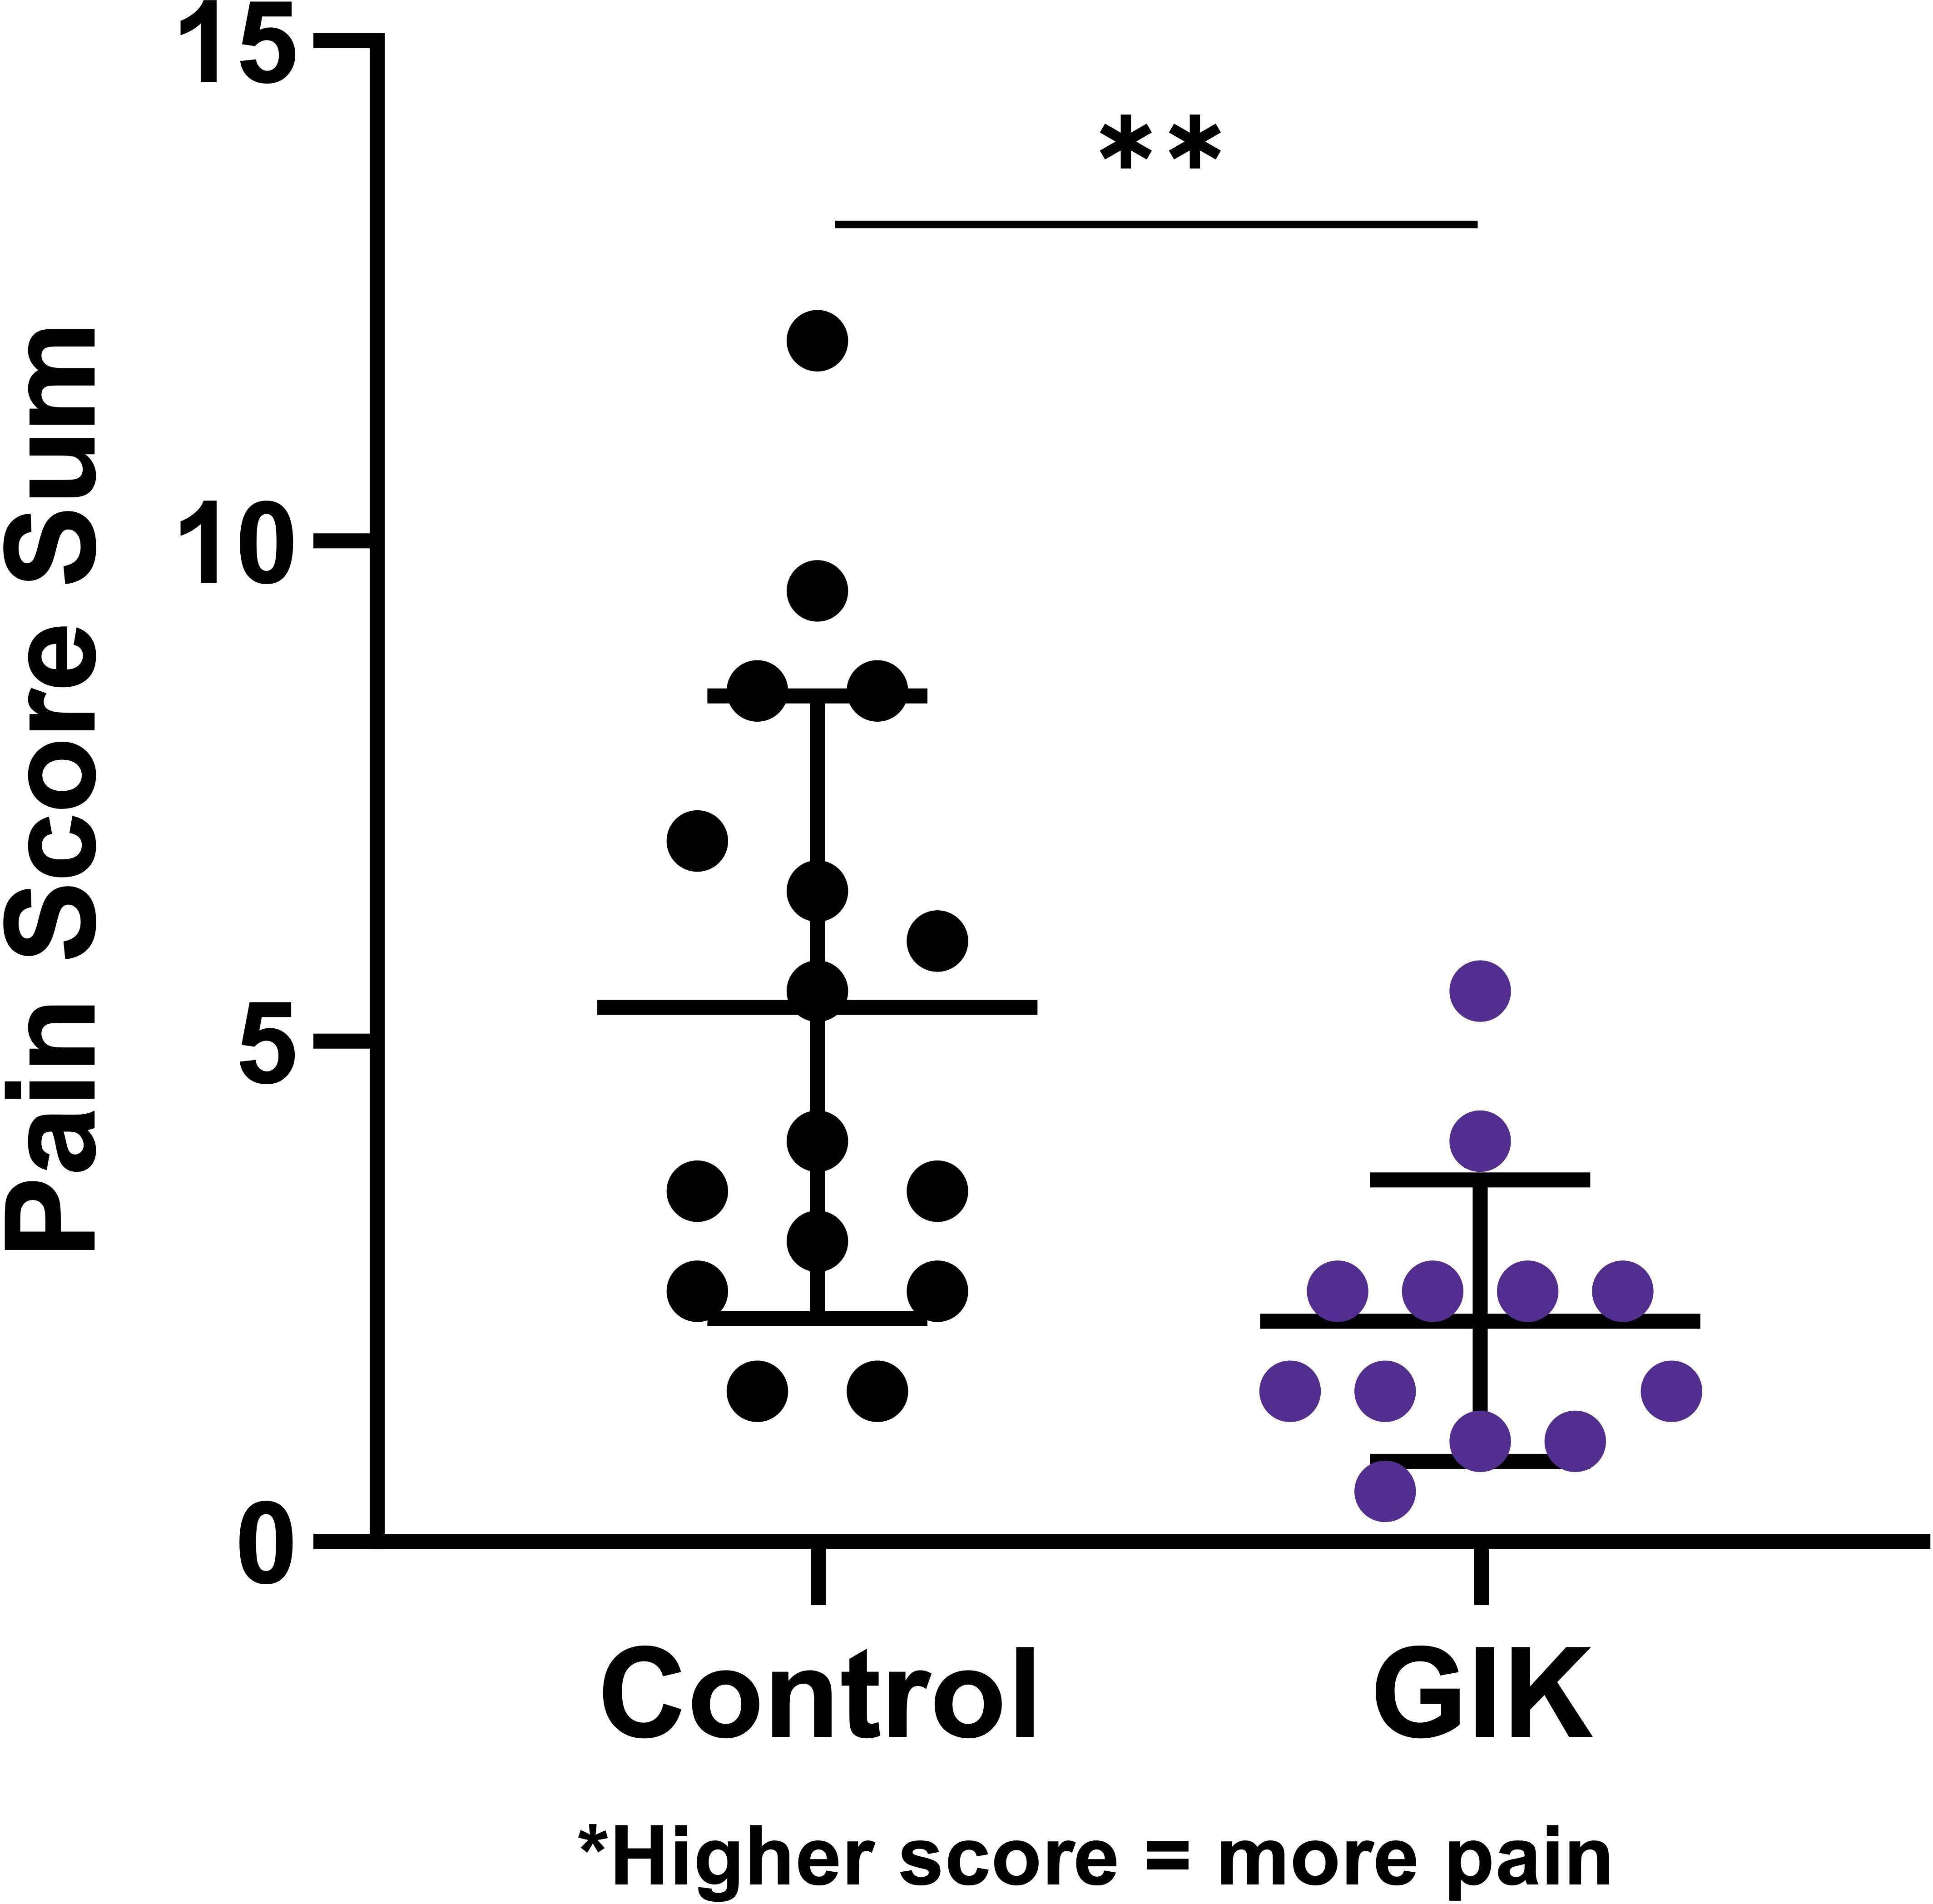 Fig. 4 
          Pain score analysis by murine ethogram calculated 24 hours after tourniquet release, demonstrating significantly less pain in the glucose-insulin-potassium (GIK) cohort compared to the control cohort (5.34/13 (n = 16) vs 2.21/13 (n = 12), p = 0.003, independent-samples t-test). A higher score represents more pain.19 **p ≤ 0.01.
        